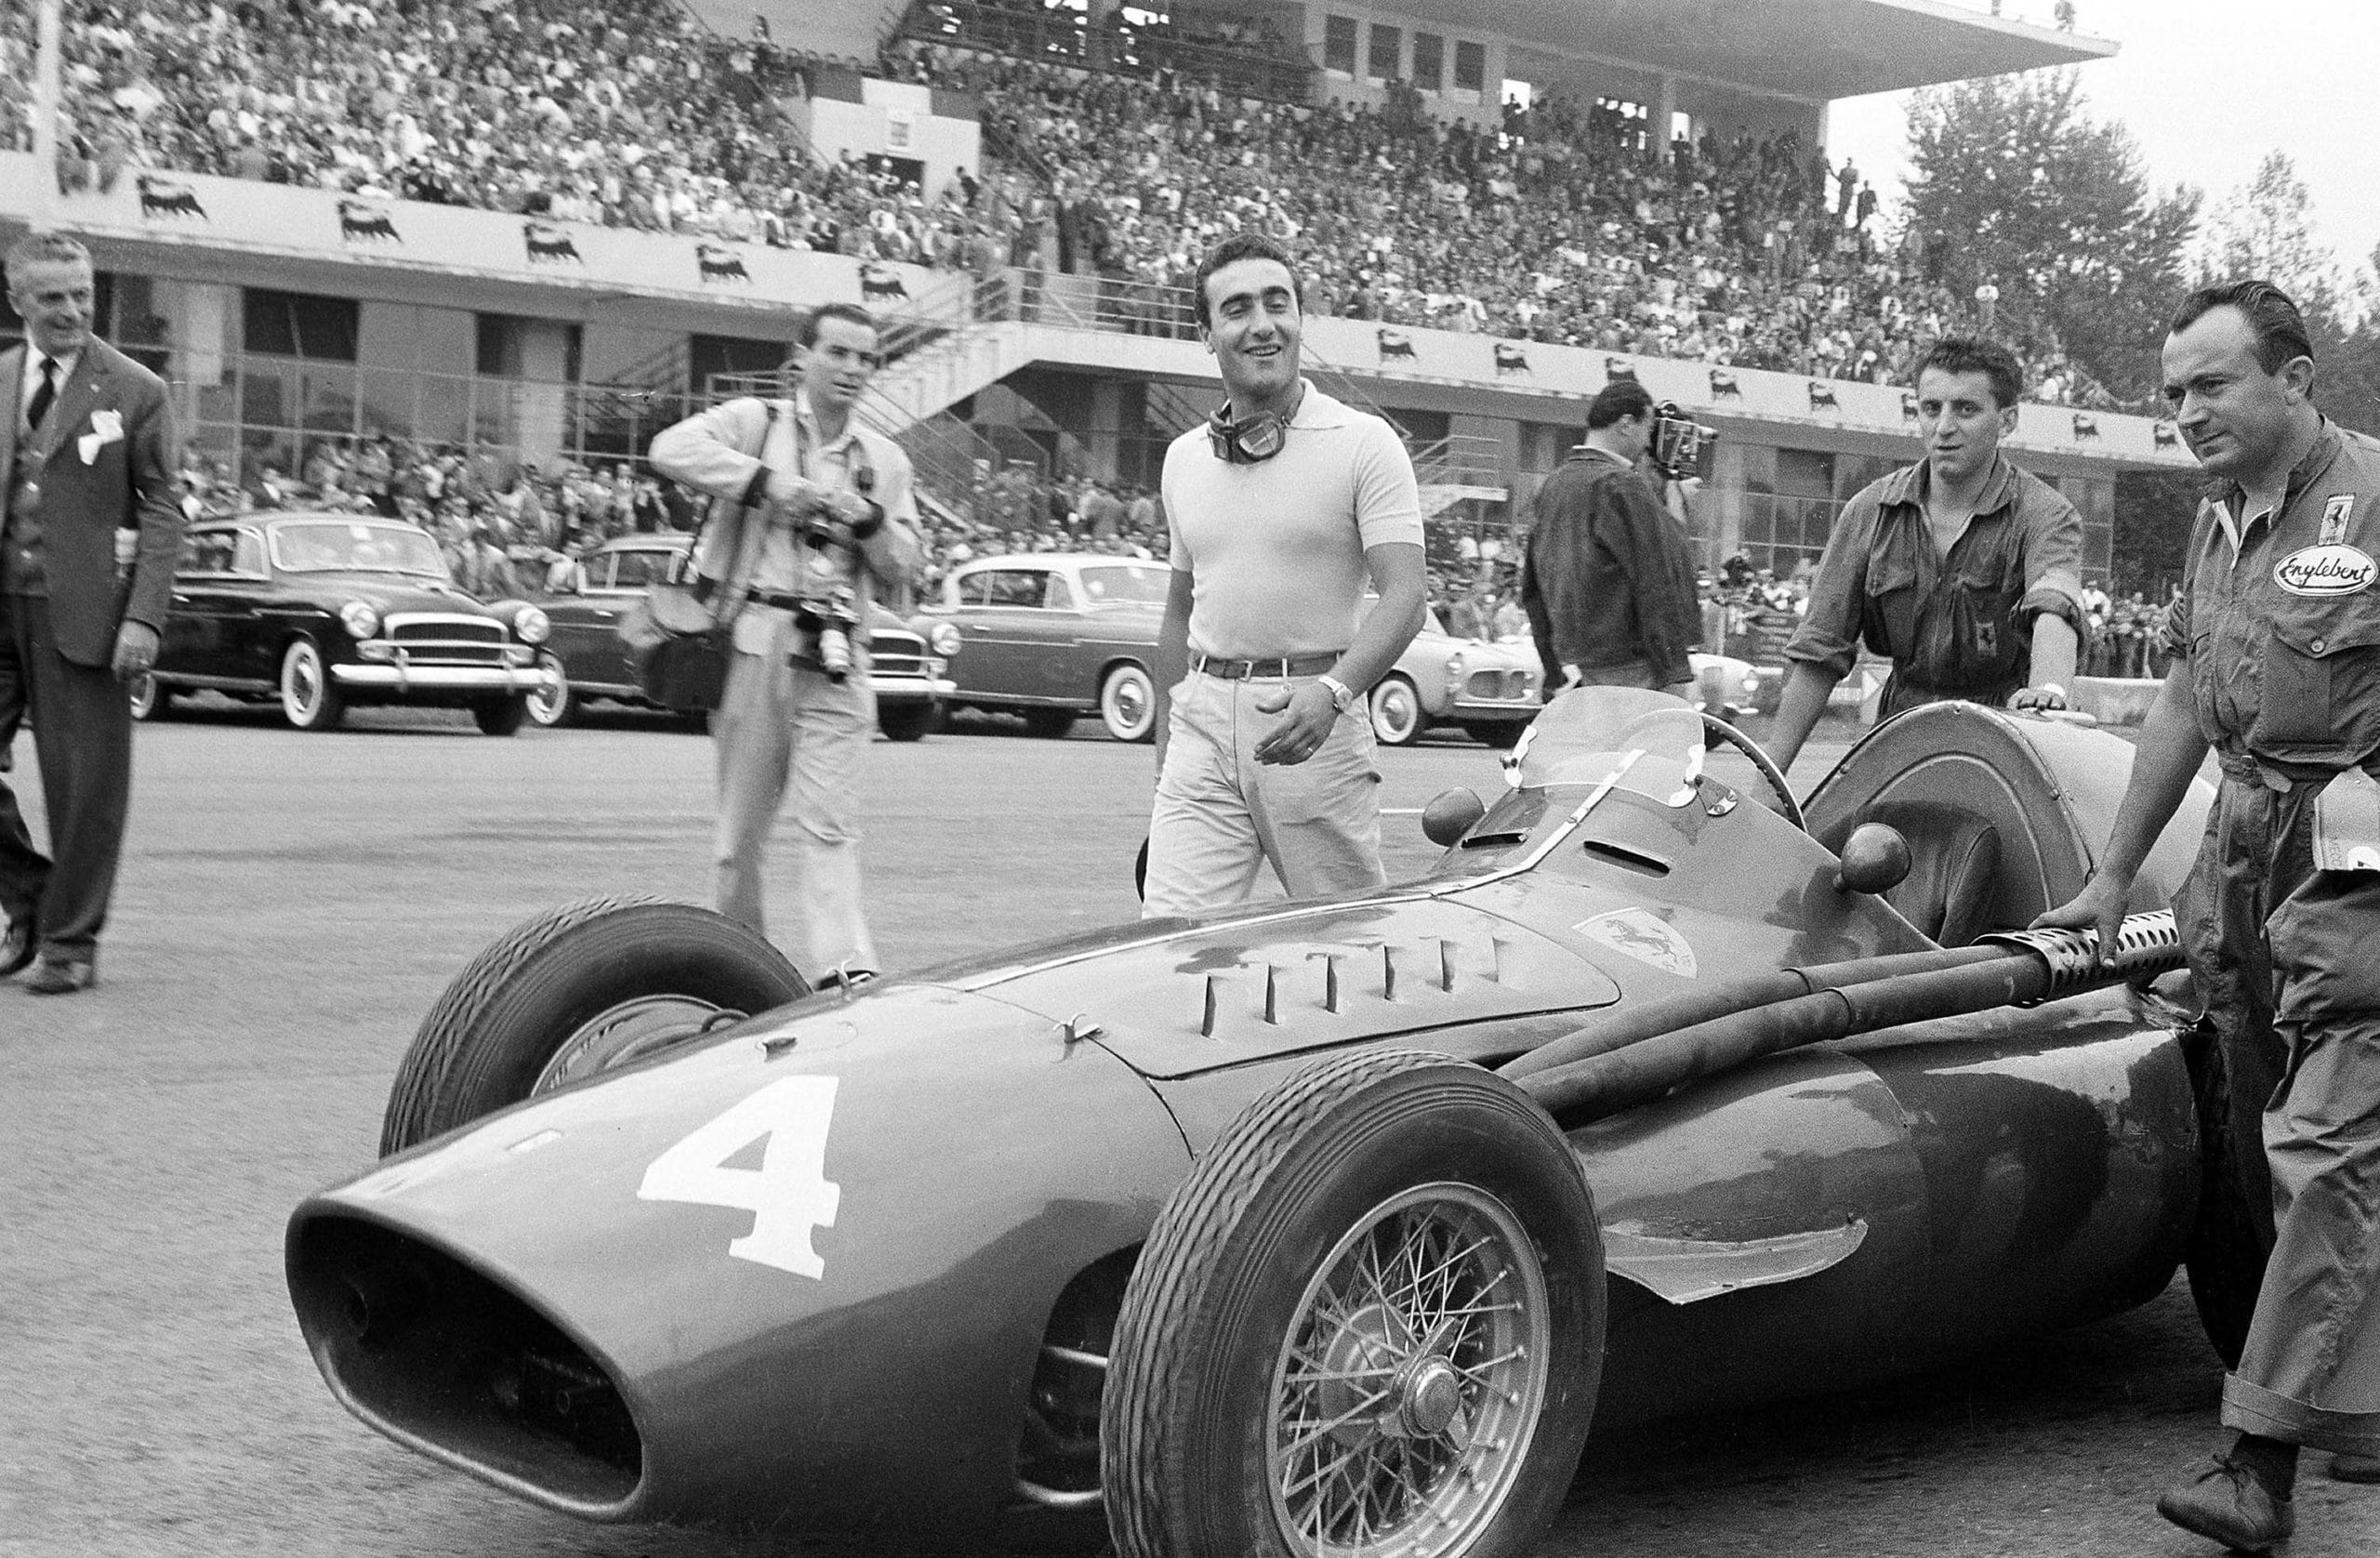 Racing driver Eugenio Castellotti with his Ferrari 'Squalo' walking to the grid before the start of the Italian Grand Prix at Monza, 11th September 1955. The man with all the cameras is the well-known photo-journalist Bernard Cahier. (Photo by Klemantaski Collection/Getty Images)